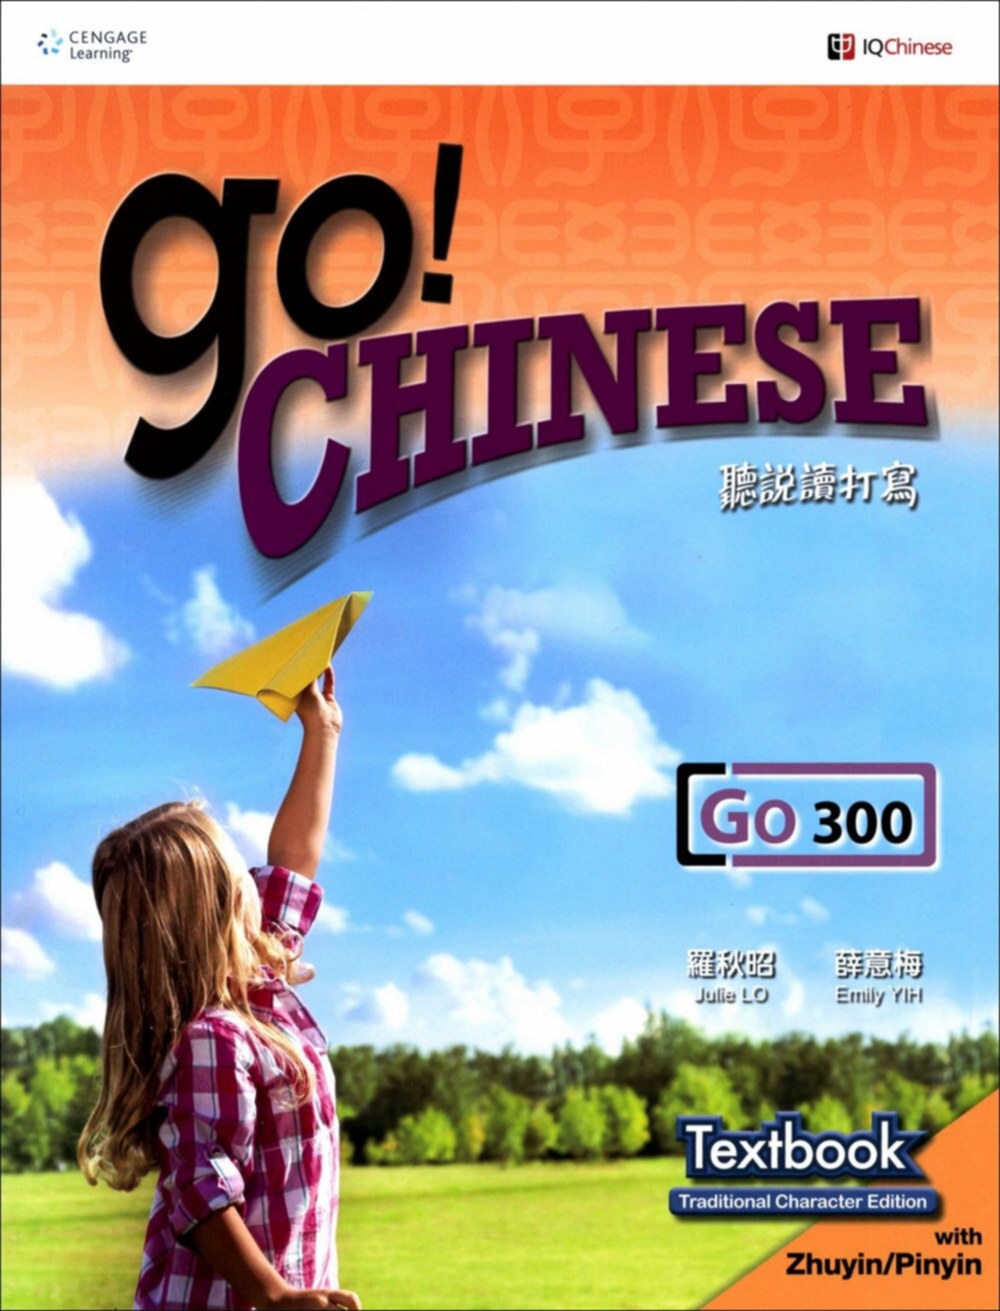 Go! Chinese Go300 Textbook (Traditional Character Edition with Zhuyin/Pinyin)